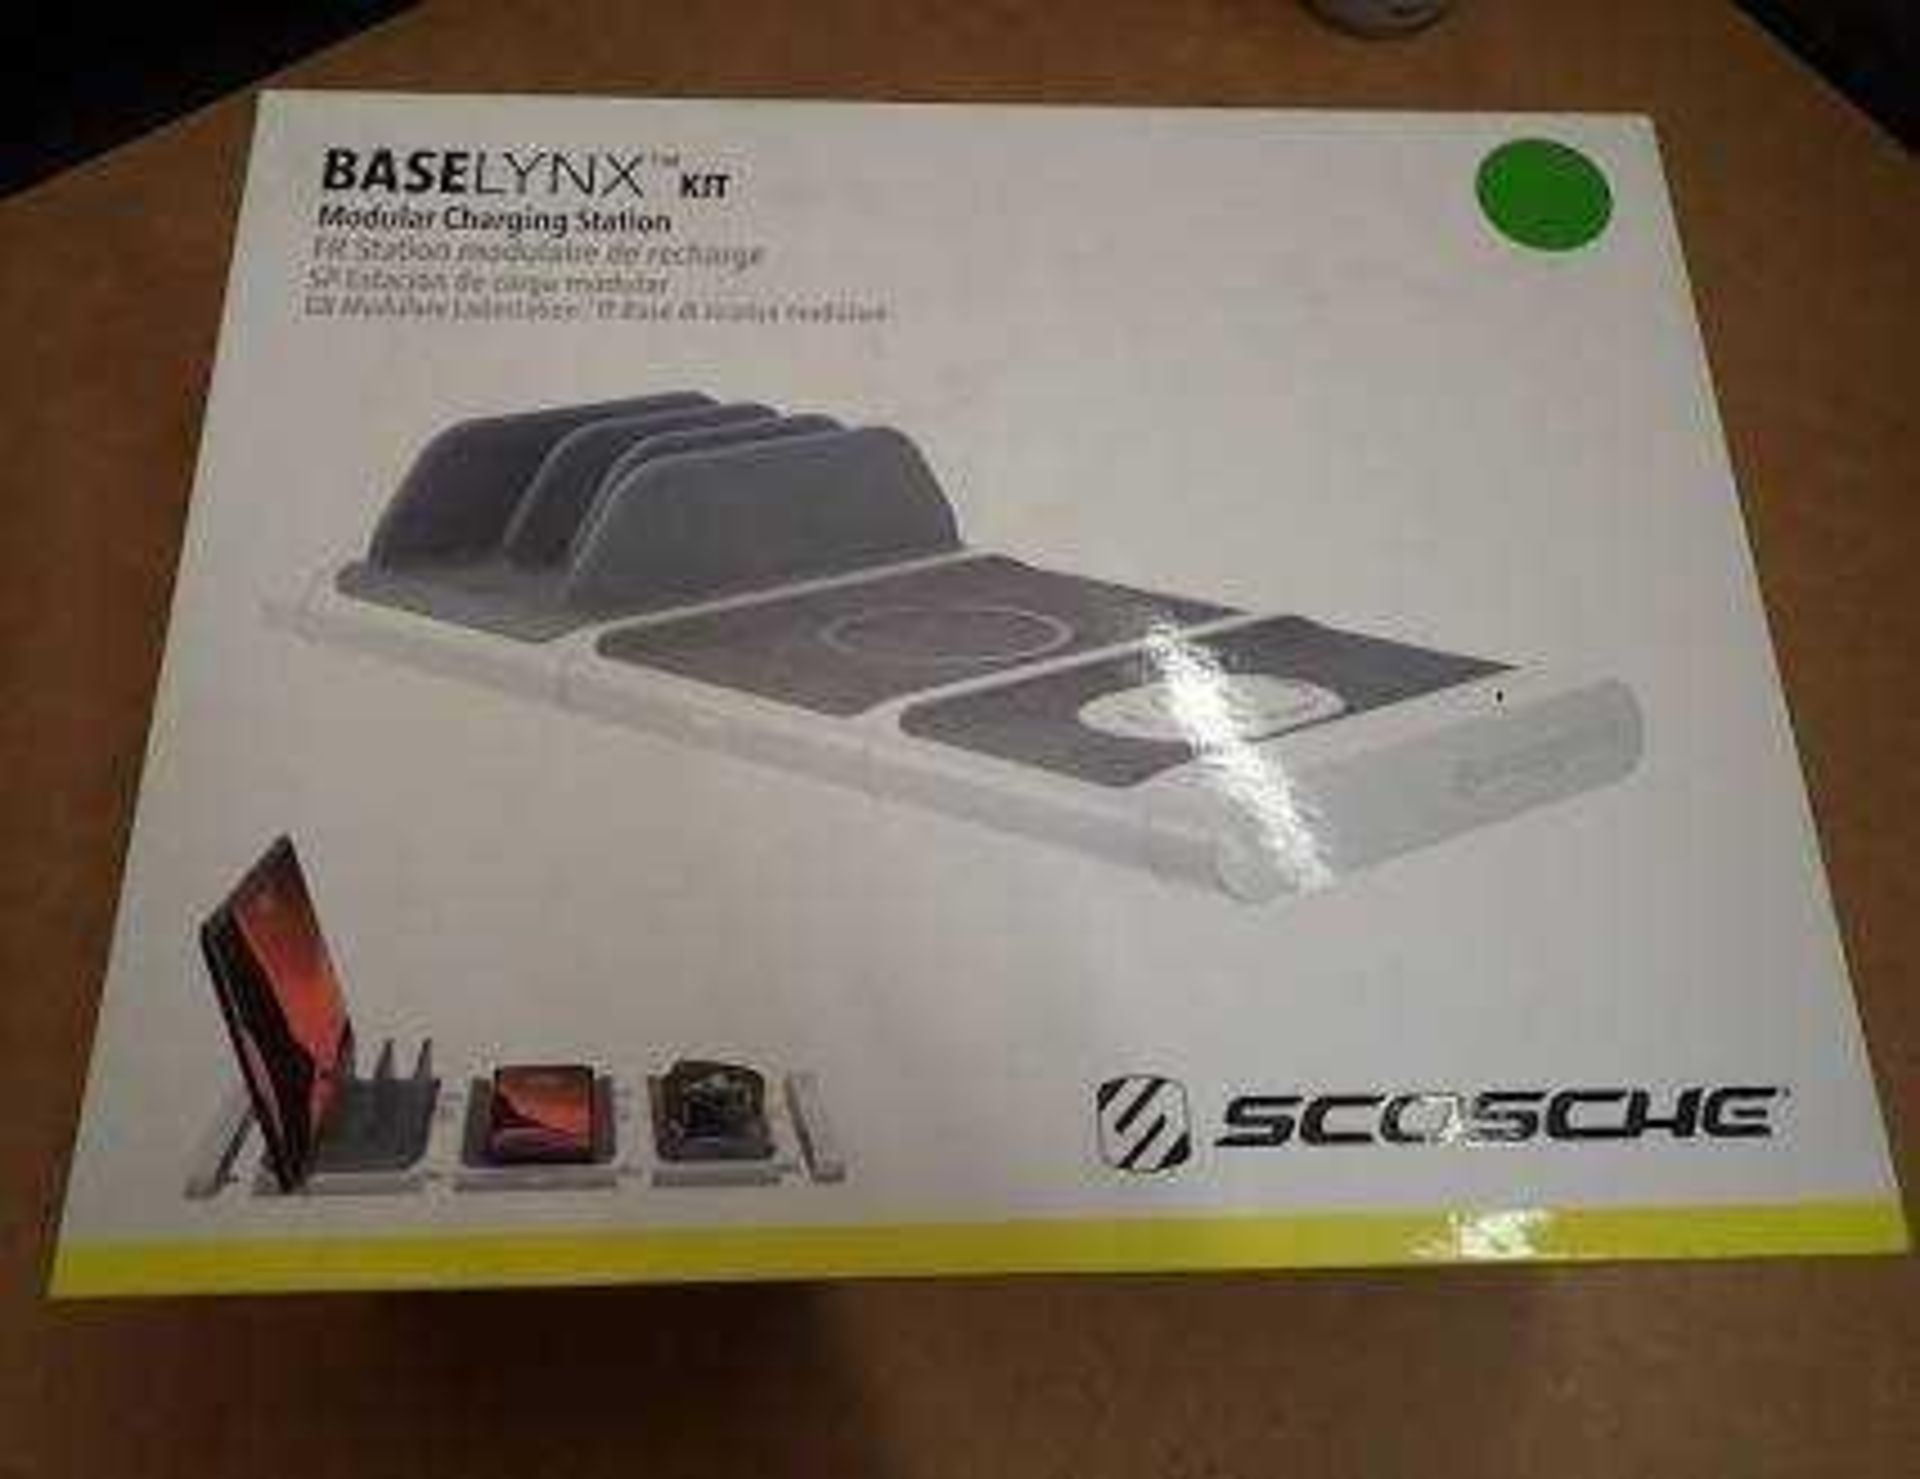 RRP £150 Boxed Scosche Baselynx Modular Charging Station Kit - Image 2 of 2